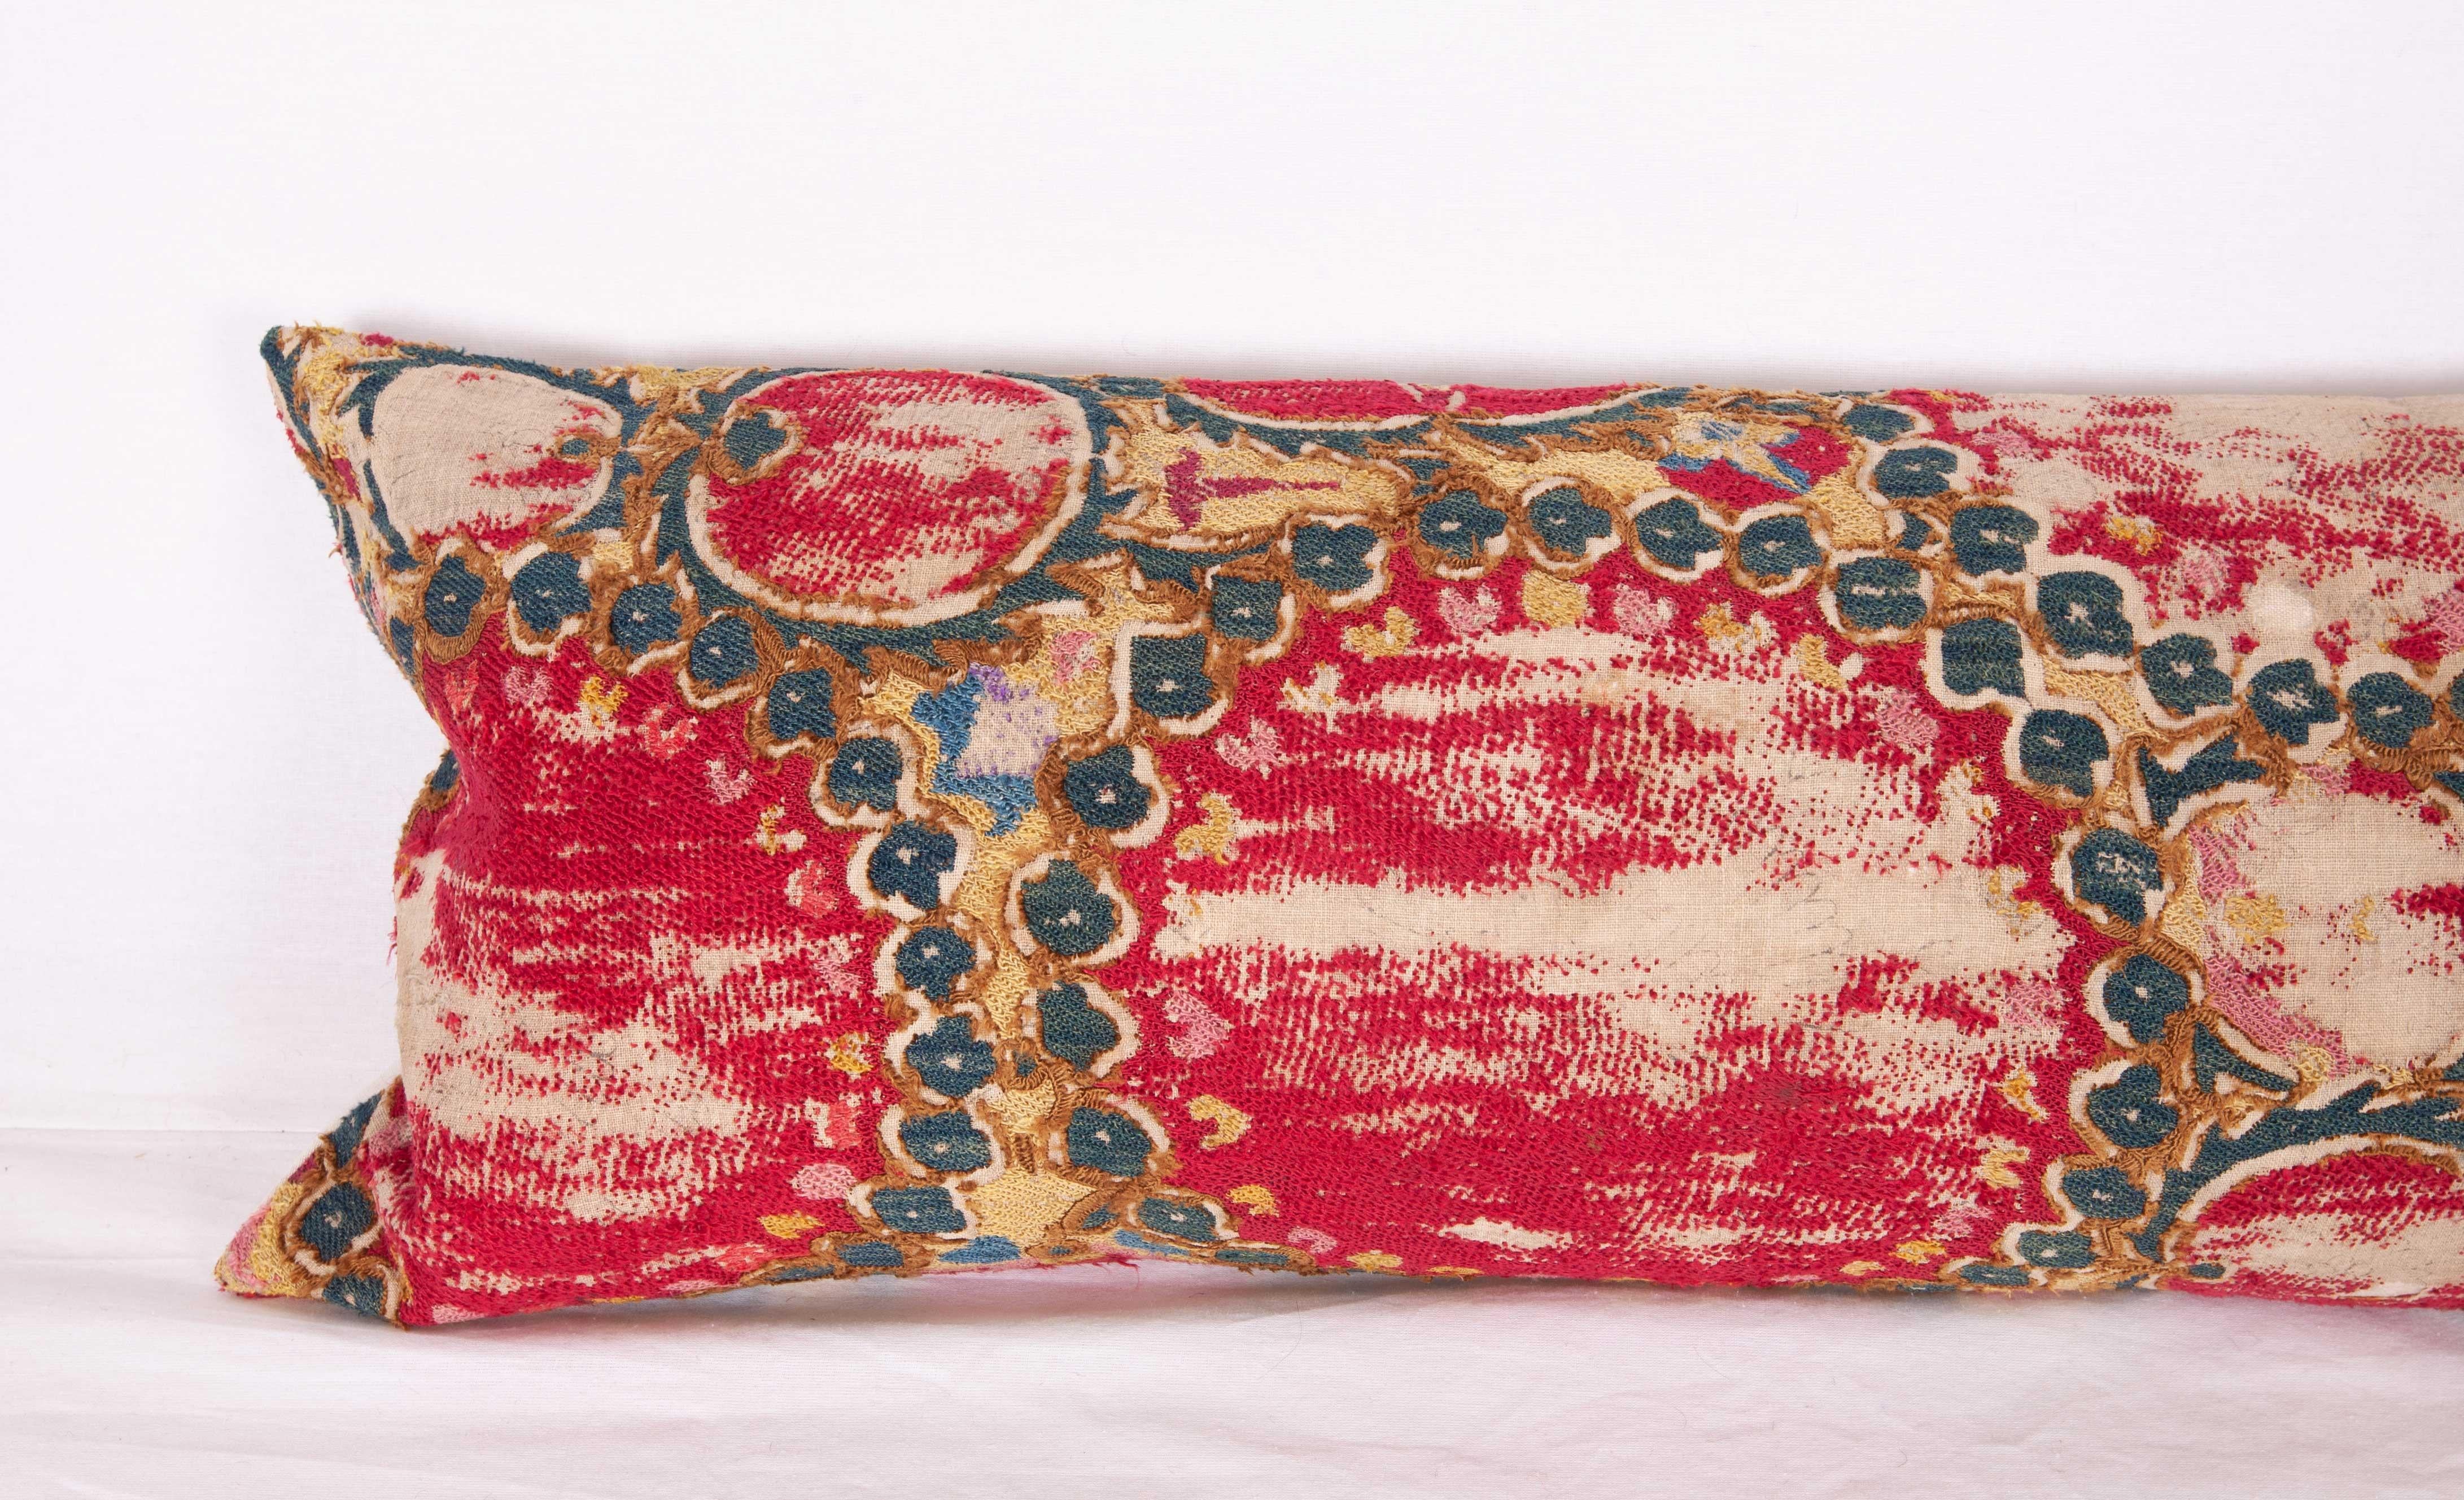 The pillow case is made from an antique Uzbek Suzani from Tashkent. It is silk embroidery on a handwoven cotton field. The backing is pure linen, and it does not come with an insert but bag made to the size in cotton to accommodate insert materials.